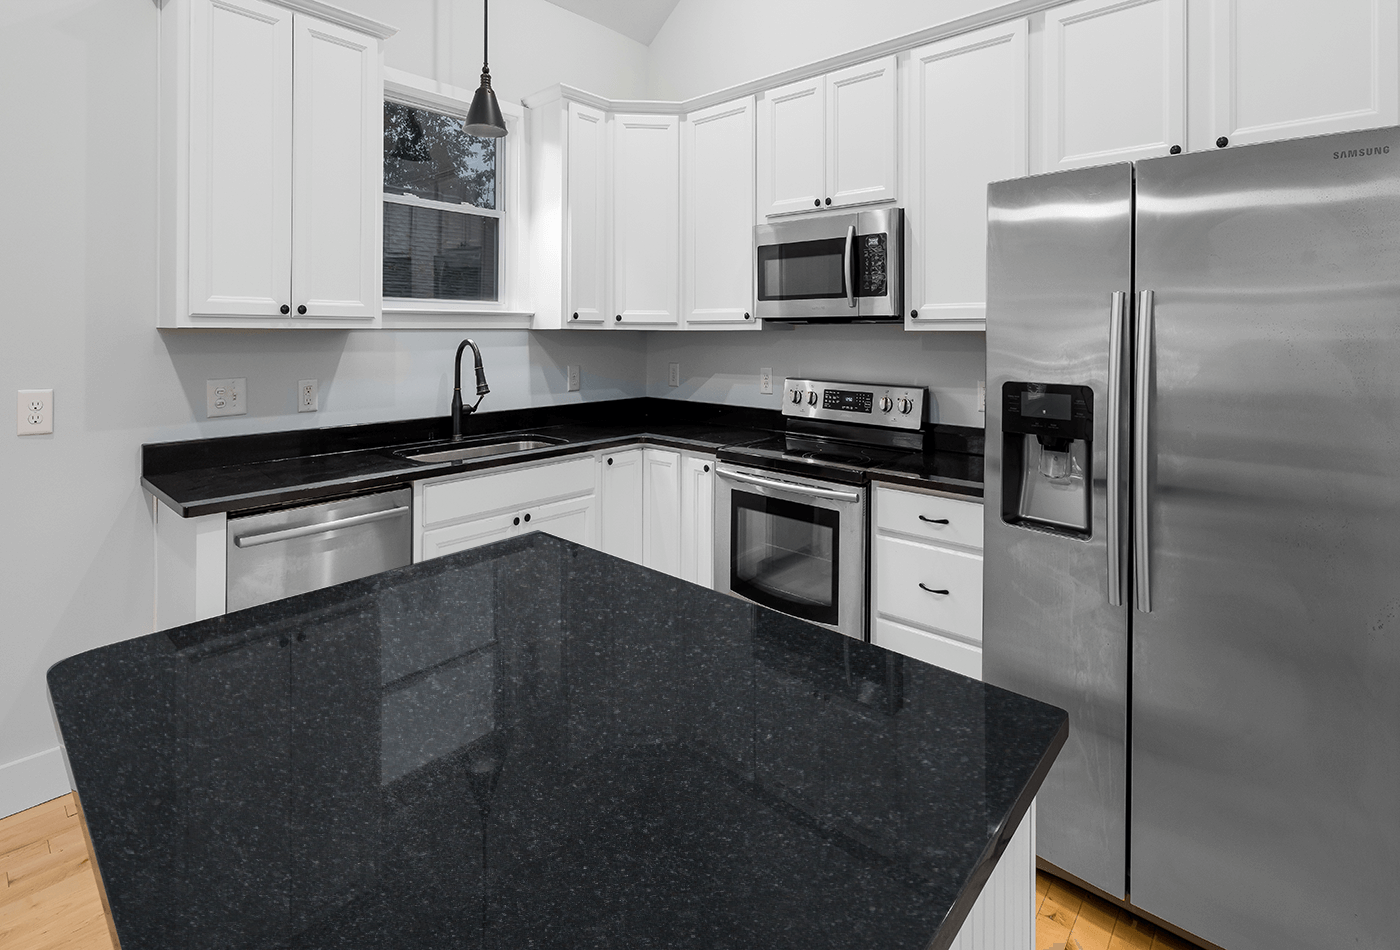 Black Counter Benefits for the kitchen